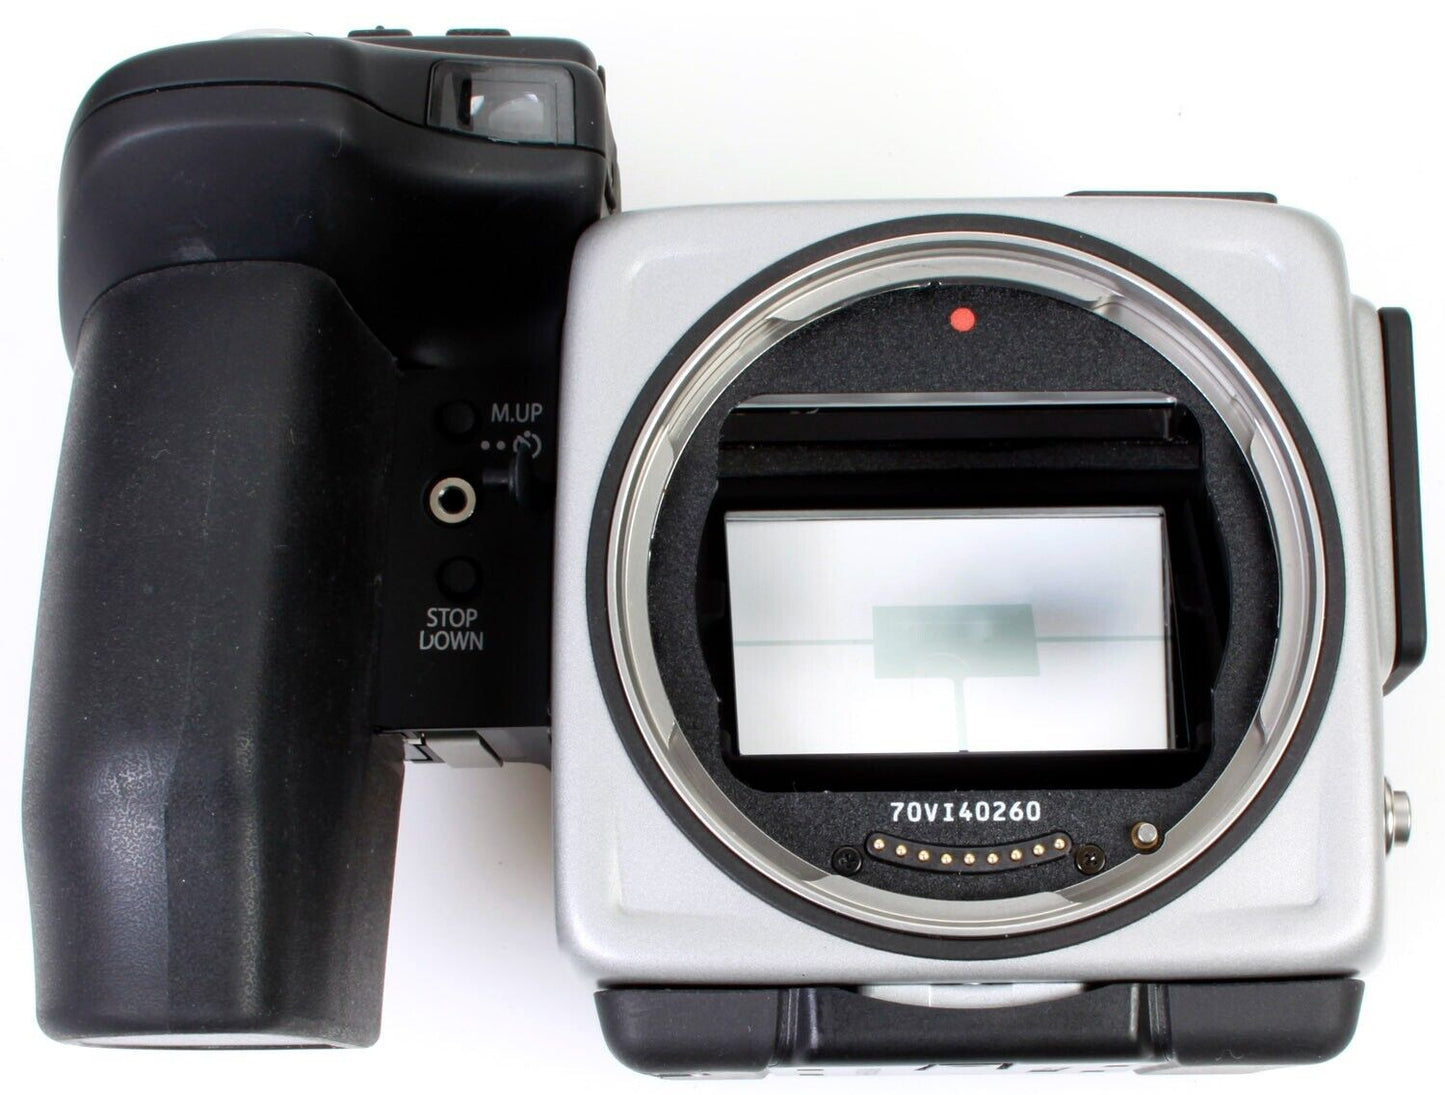 Hasselblad H5X Camera Body w/ HV 90X Grip&Viewfinder, HM 16 32 Film Back w/Boxes